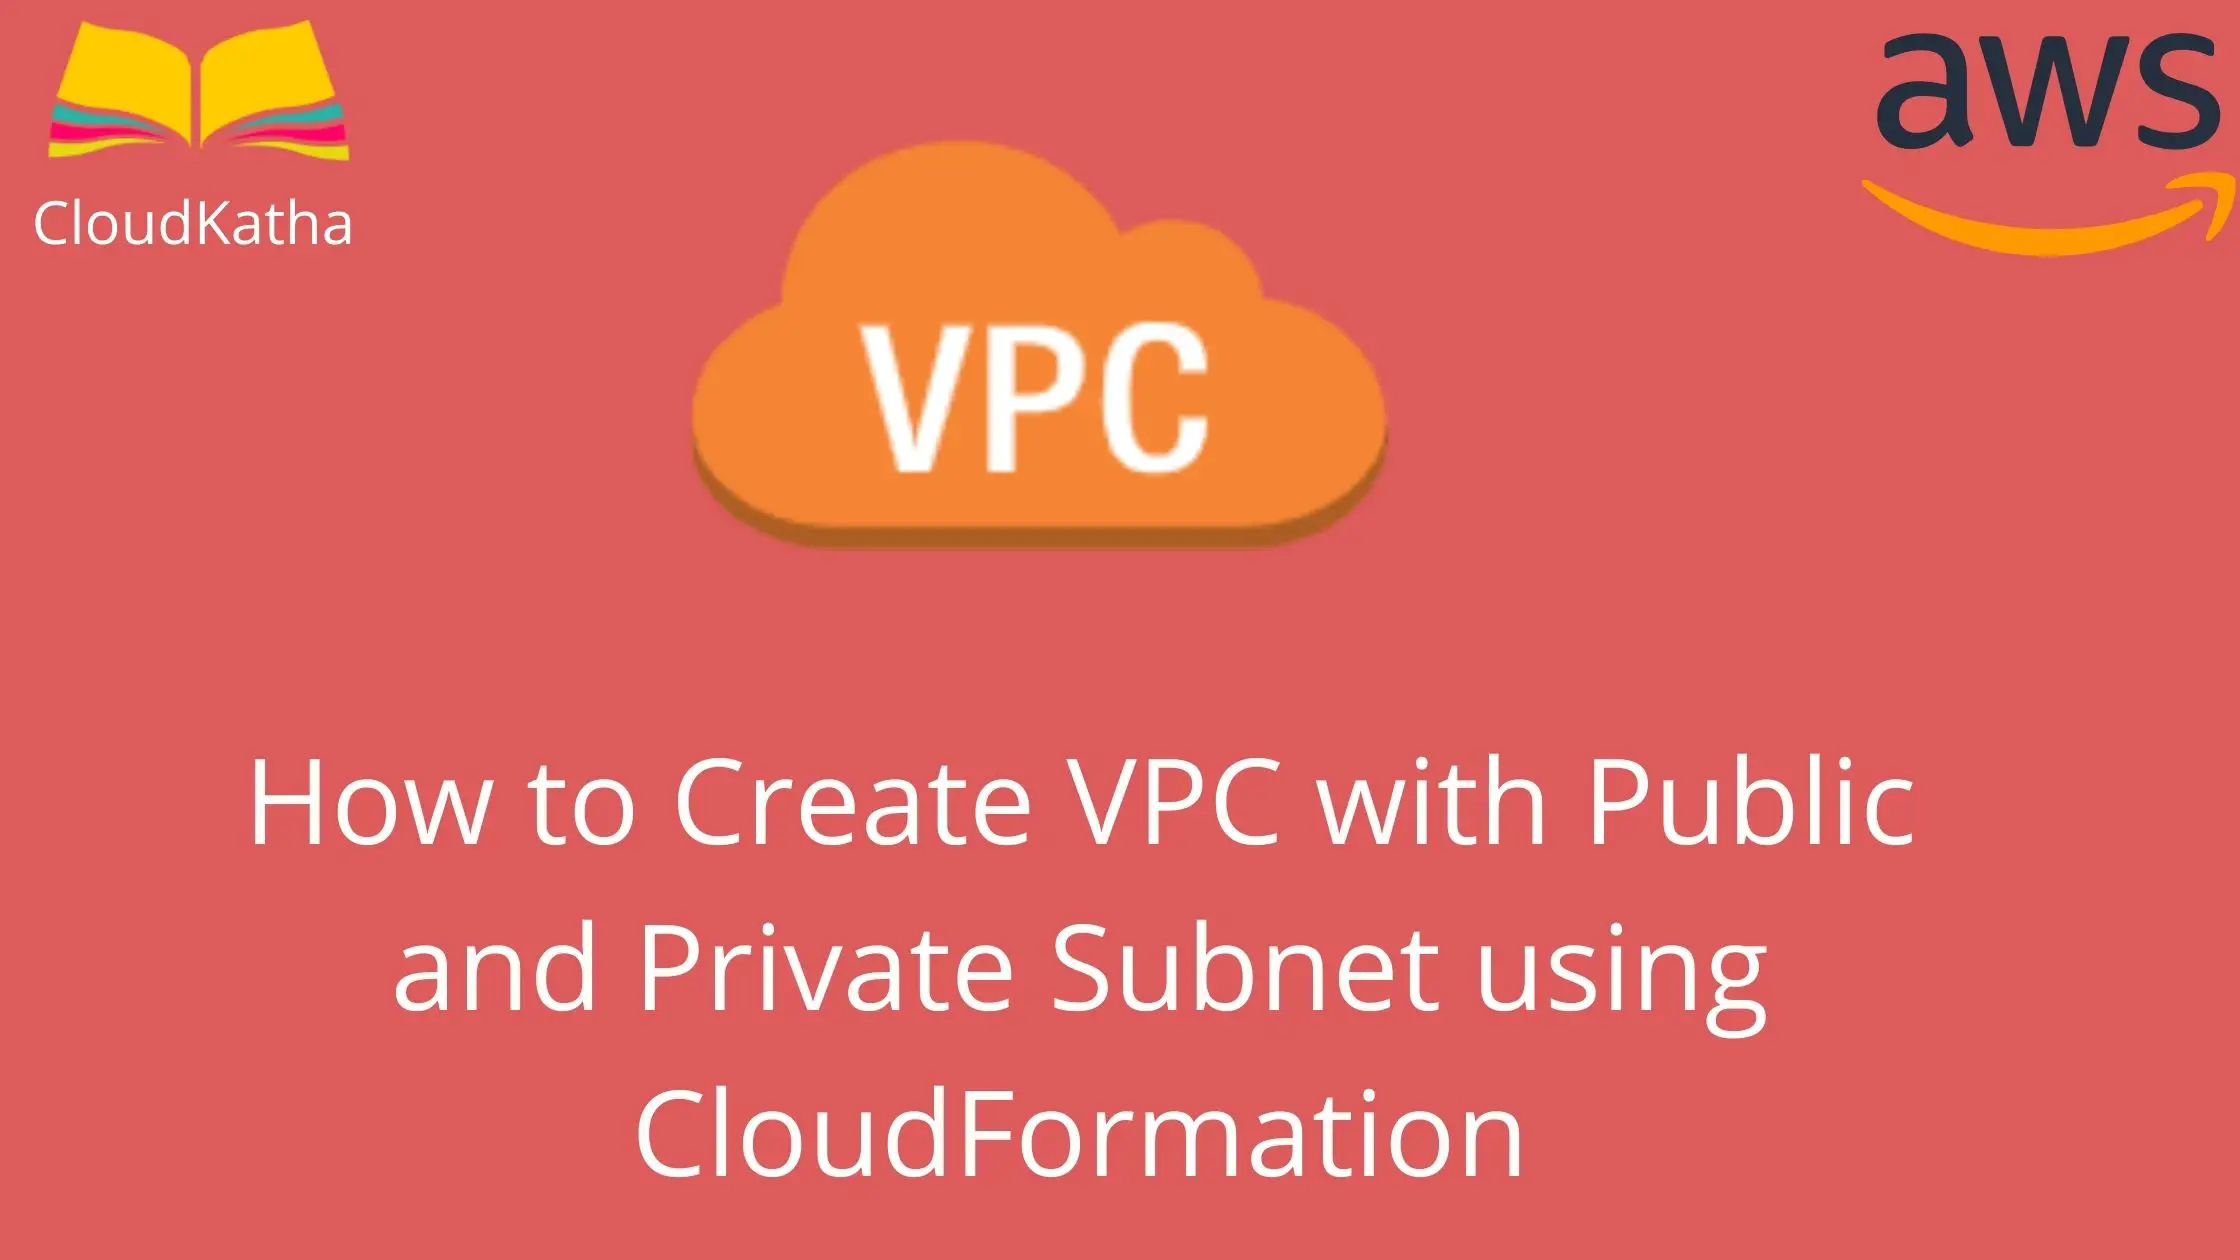 How to Create VPC with Public and Private Subnet using CloudFormation